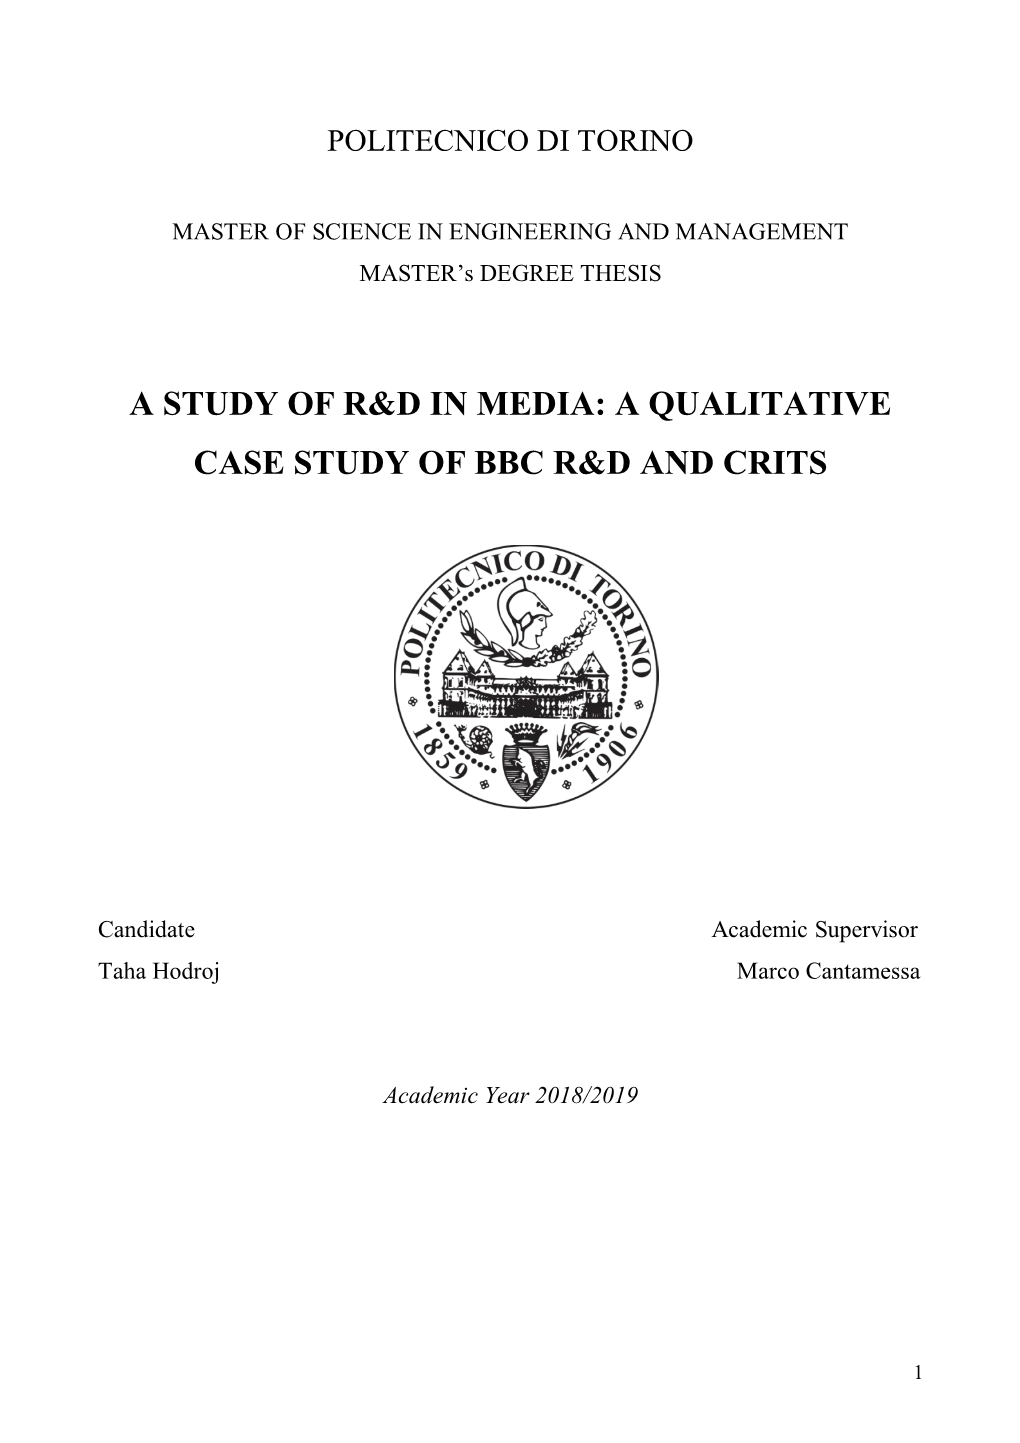 A Study of R&D in Media